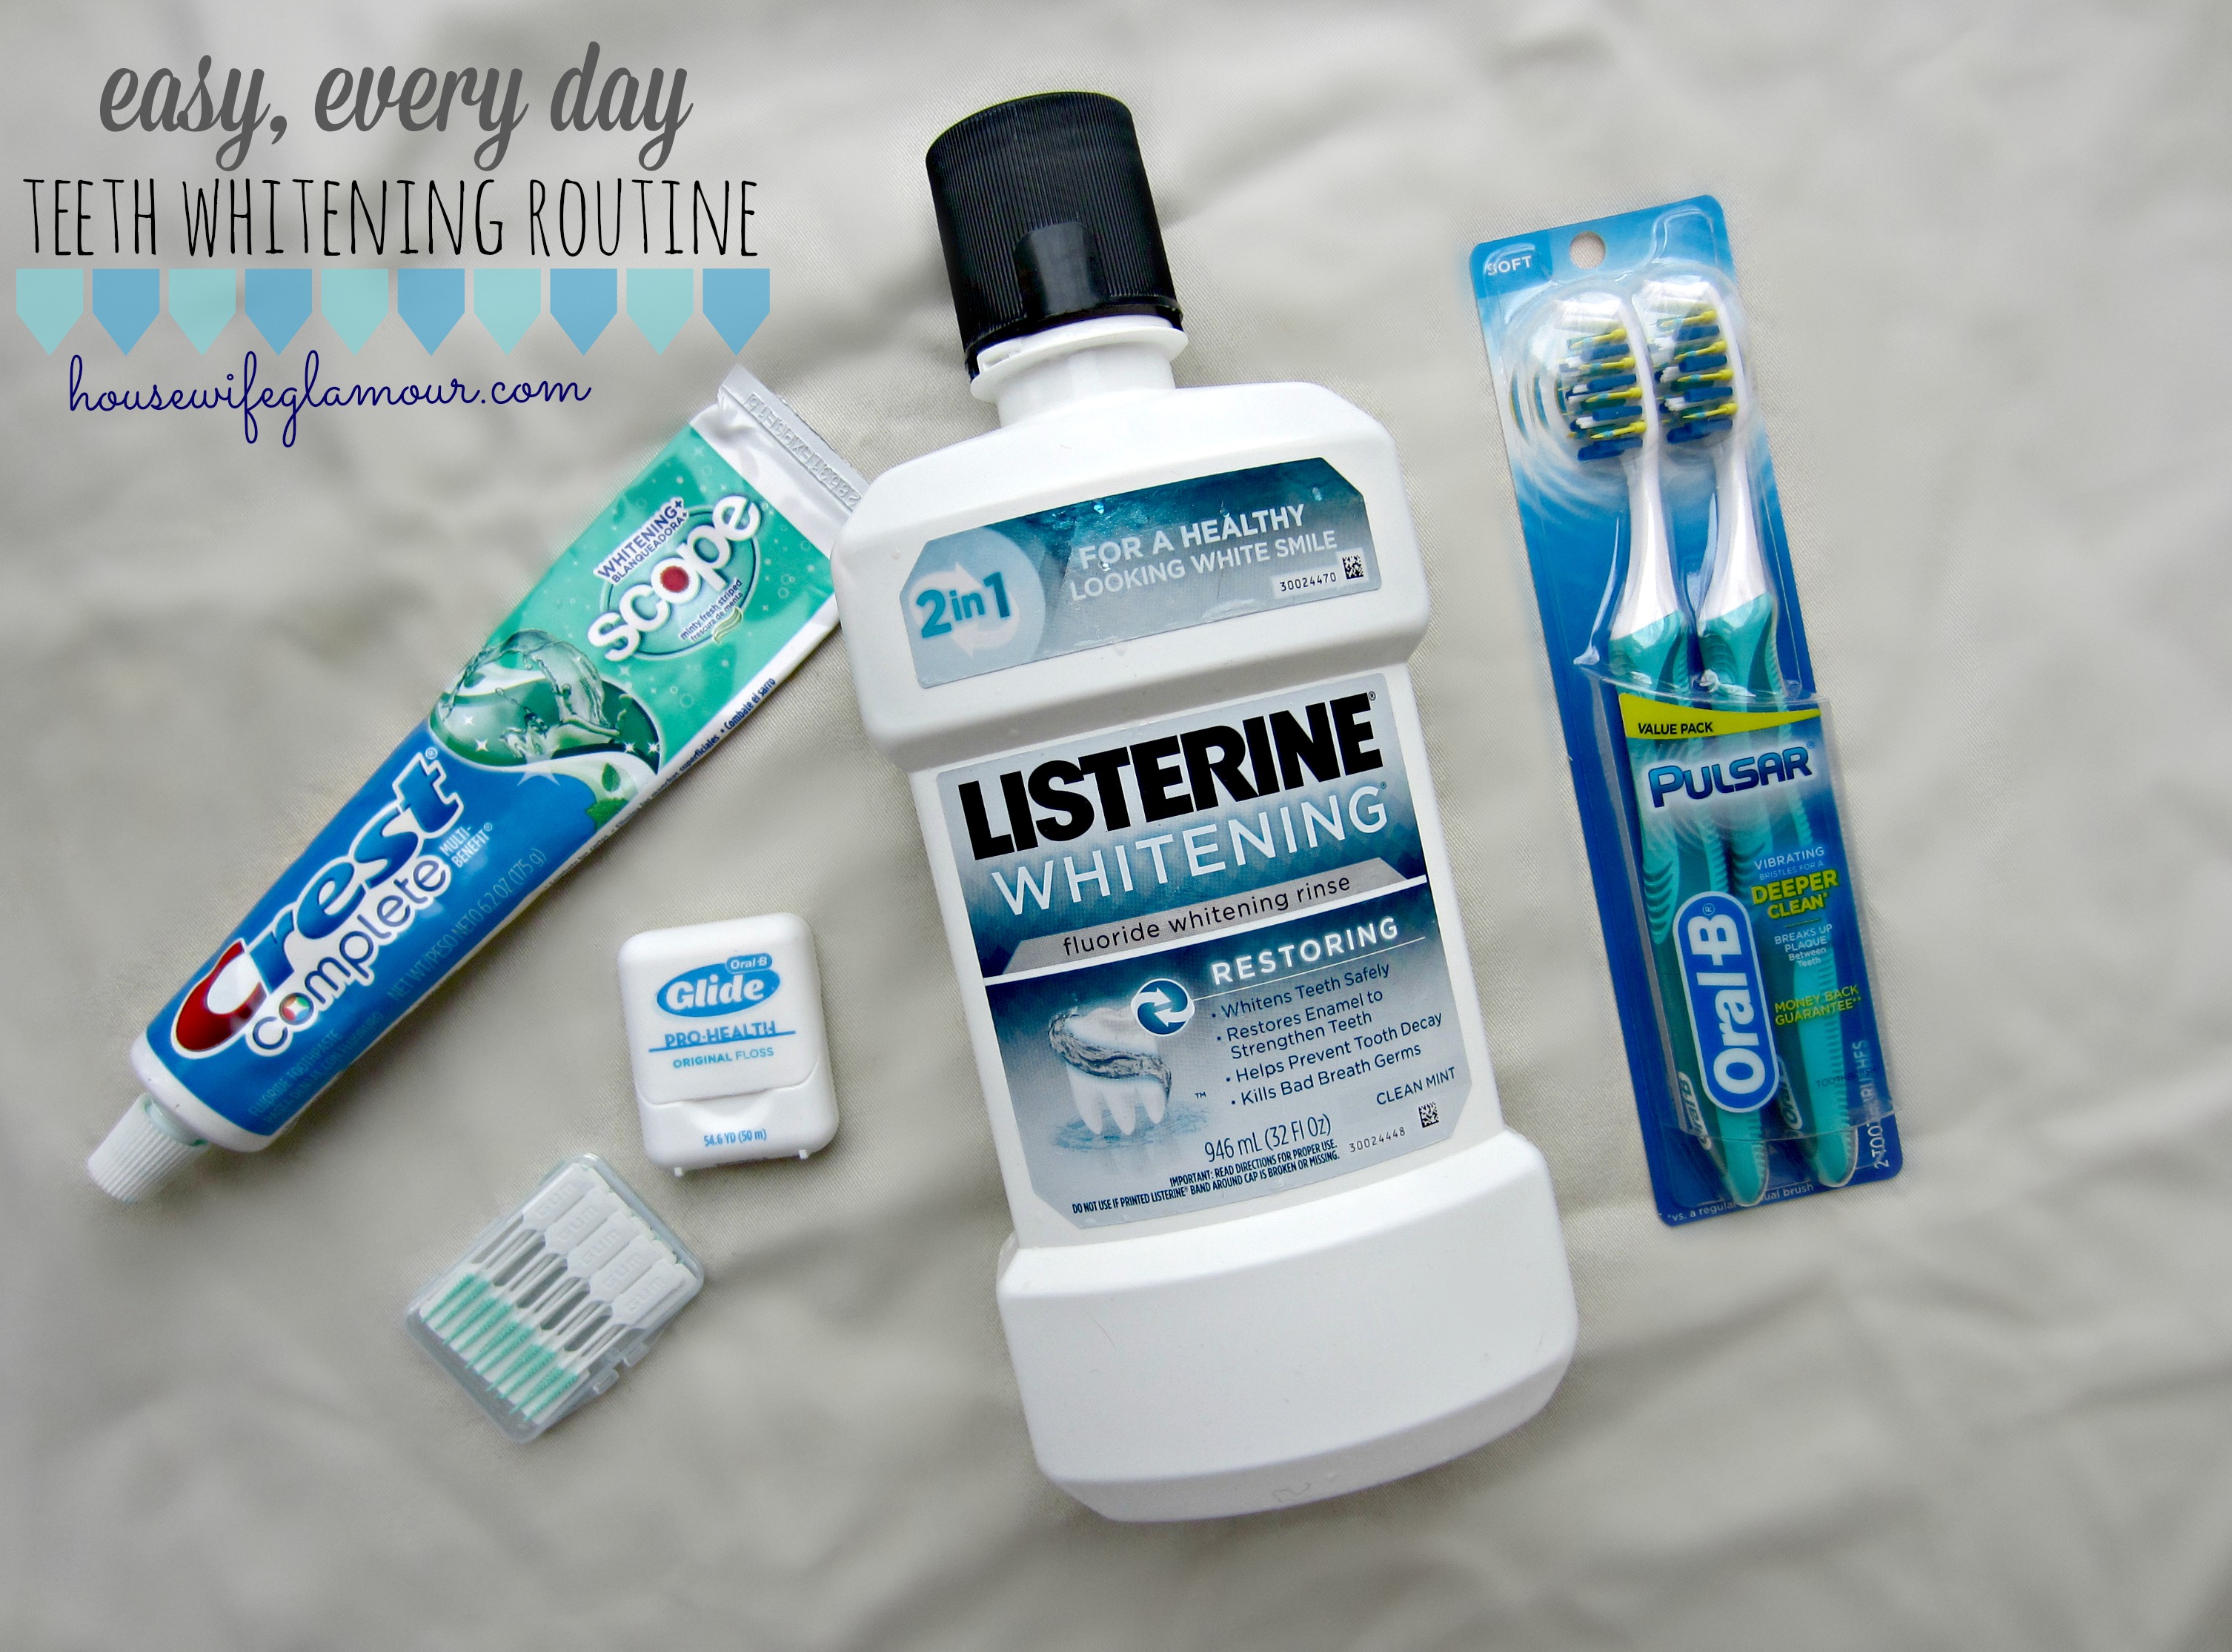 Easy, Every Day Teeth Whitening Routine